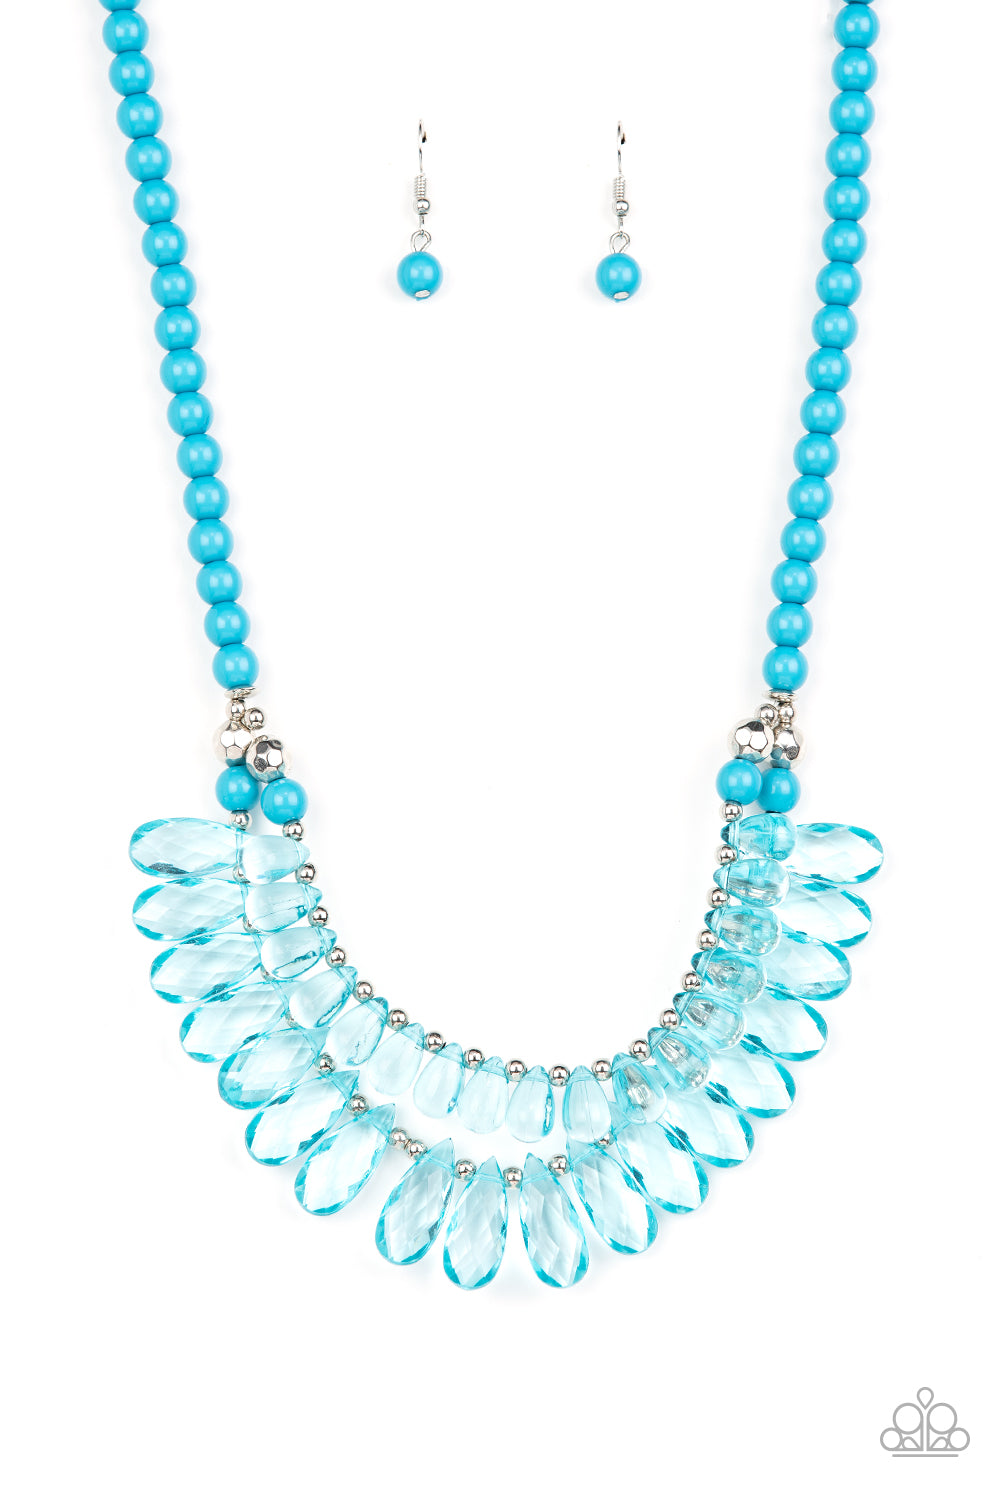 five-dollar-jewelry-all-across-the-globetrotter-blue-necklace-paparazzi-accessories